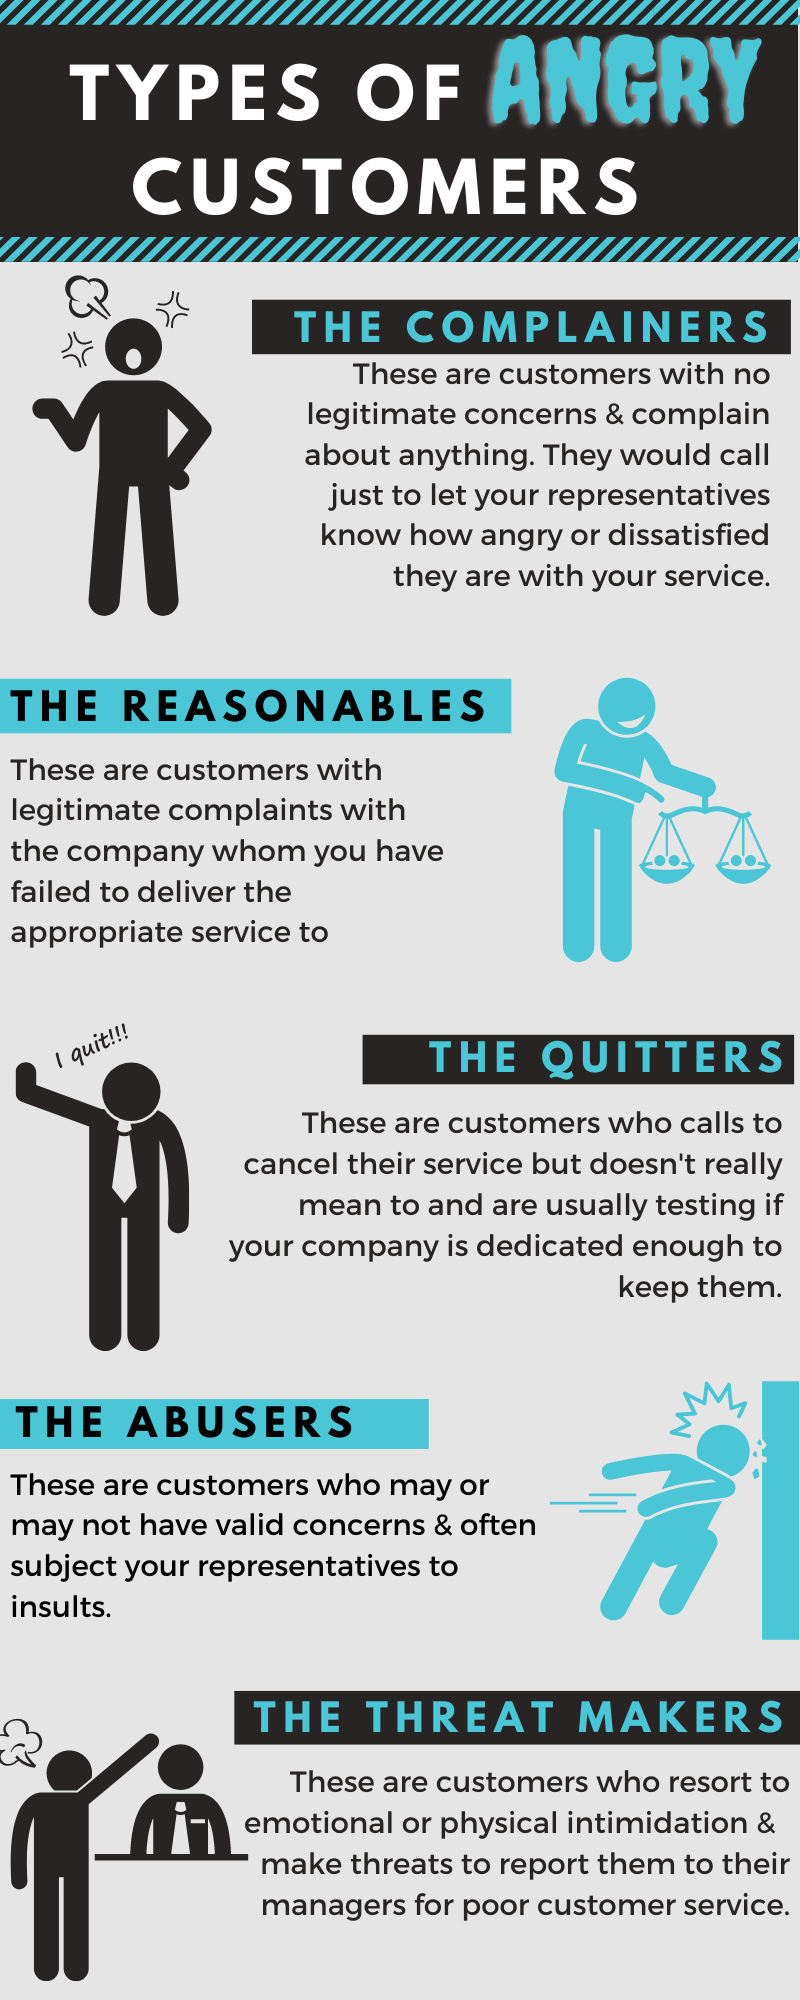 Types of Angry Customers Infographic